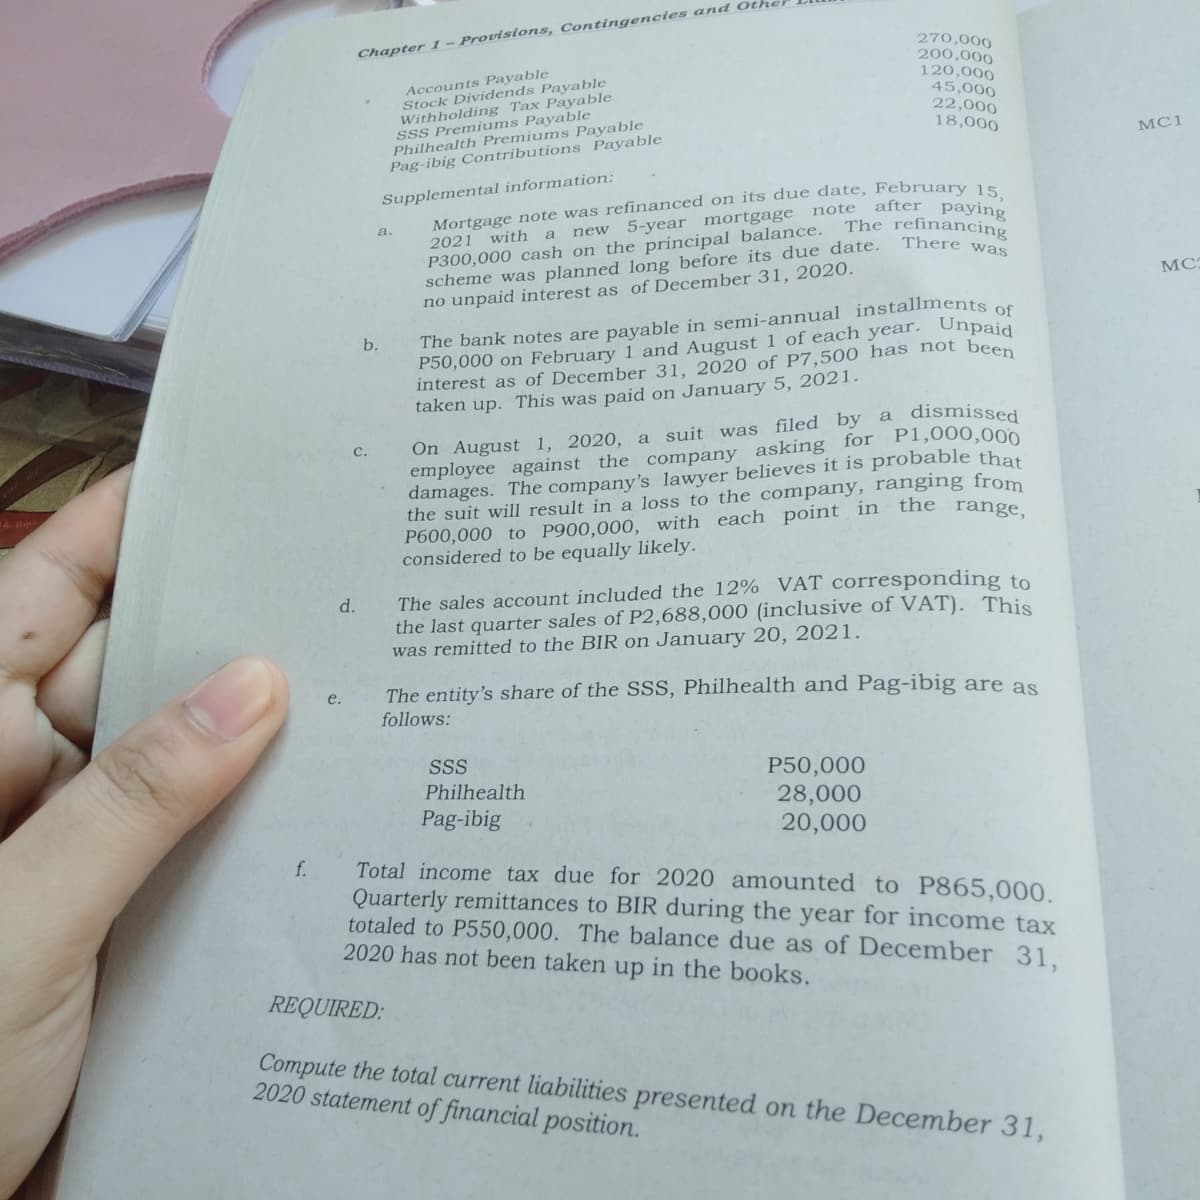 270,000
200,000
120,000
45,000
22,000
18,000
Chapter 1 – Provisions, Contingencies and Ot
Accounts Payable
Stock Dividends Payable
Withholding Tax Payable
SSS Premiums Payable
Philhealth Premiums Payable
Pag-ibig Contributions Payable
MC1
Supplemental information:
note after paying
a.
new 5-year mortgage
2021 with
There was
scheme was planned long before its due date.
no unpaid interest as of December 31, 2020.
МС
The bank notes are payable in semi-annual installments s
P50,000 on February 1 and August 1 of each year. Unpaid
interest as of December 31, 2020 of P7,500 has not been
taken up. This was paid on January 5, 2021.
b.
On August 1, 2020, a suit was filed by a dismissed
employee against the company asking for P1,000,000
damages. The company's lawyer believes it is probable that
the suit will result in a loss to the company, ranging from
P600,000 to P900,000, with each point in the
considered to be equally likely.
С.
range,
The sales account included the 12% VAT corresponding to
the last quarter sales of P2,688,000 (inclusive of VAT). This
was remitted to the BIR on January 20, 2021.
d.
The entity's share of the SSS, Philhealth and Pag-ibig are as
follows:
e.
SSS
P50,000
28,000
20,000
Philhealth
Pag-ibig
f.
Total income tax du
Quarterly remittances to BIR during the year for income tax
totaled to P550,000. The balance due as of December 31.
2020 has not been taken up in the books.
for 2020 amounted to P865,000.
REQUIRED:
Compute the total current liabilities presented on the December 31,
2020 statement of financial position.
